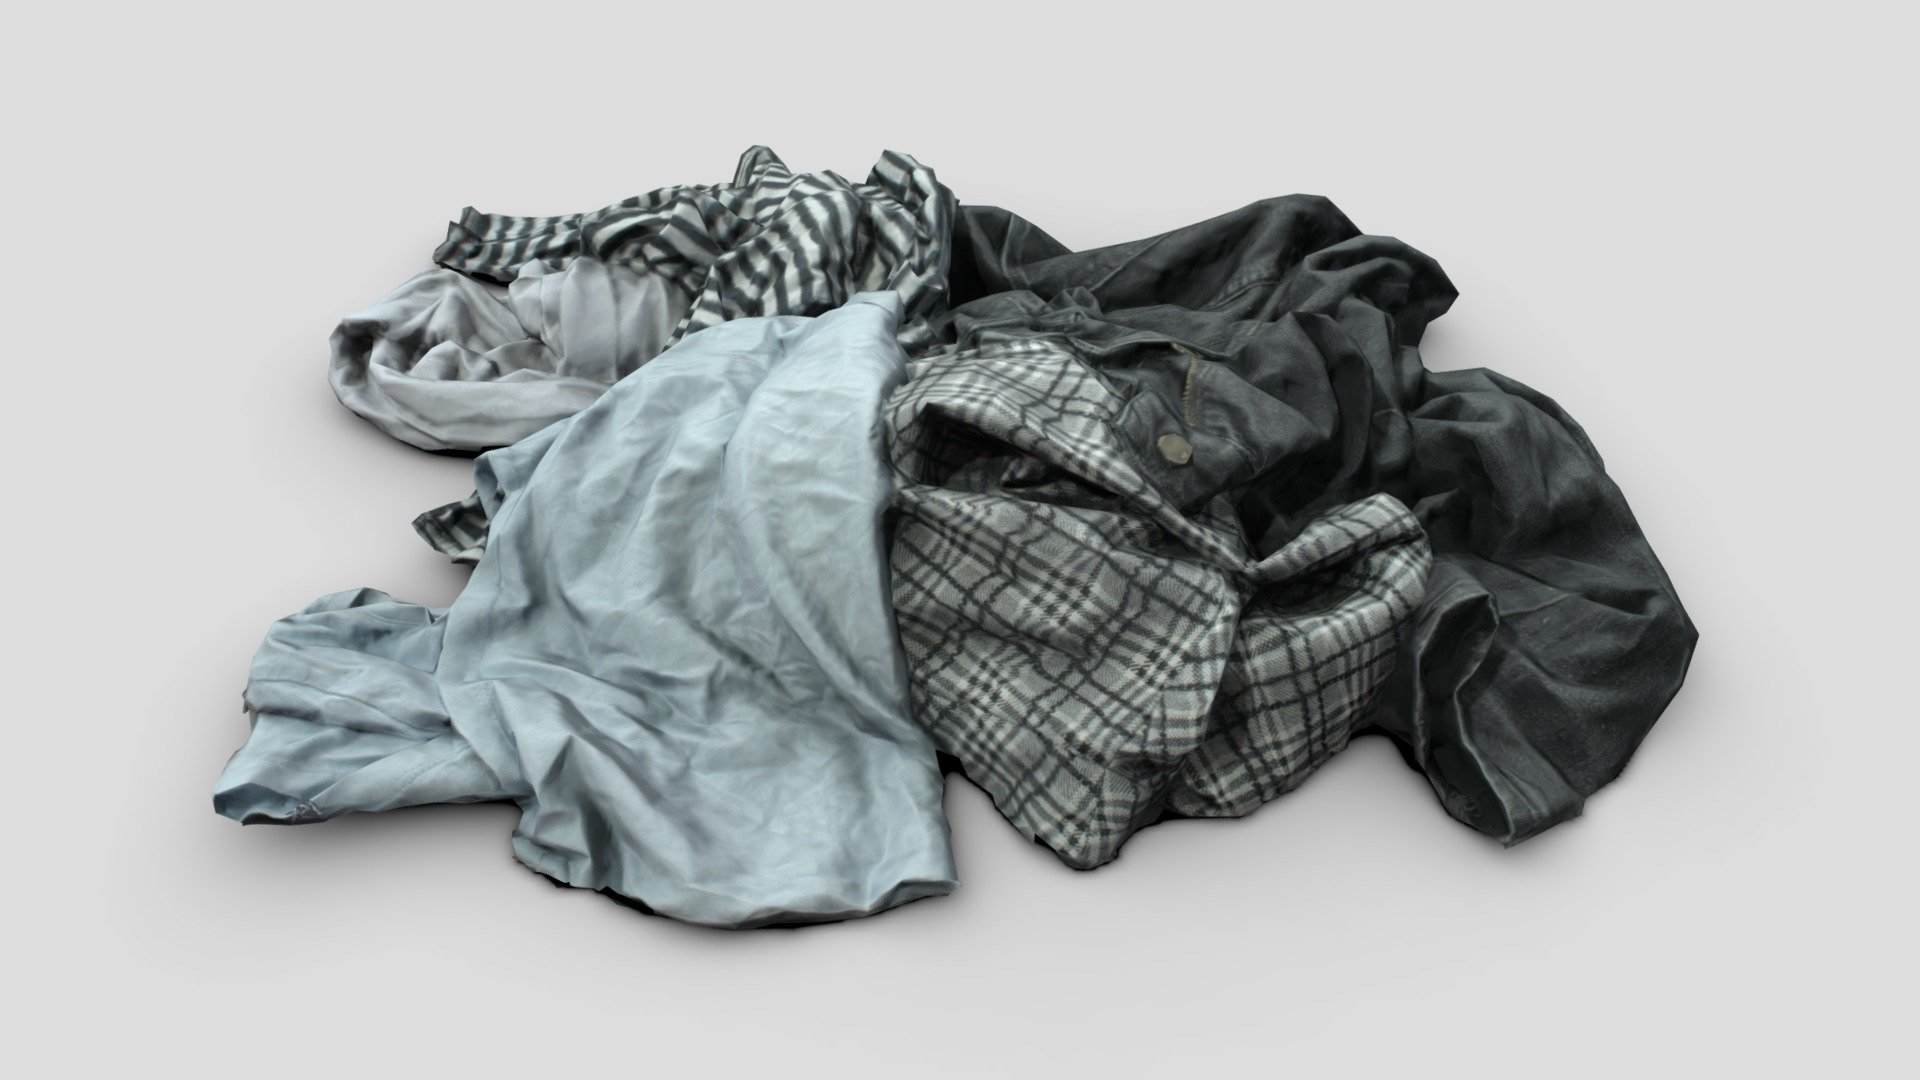 A small pile of clothes on the floor, low poly and game ready.

Fully UV Mapped. Complete with Colour, Ambient Occlusion and Normal Map textures. All Textures Included at 1024x1024 as well as 4096x4096 Includes both OBJ and FBX formats as well as MAX 3d model